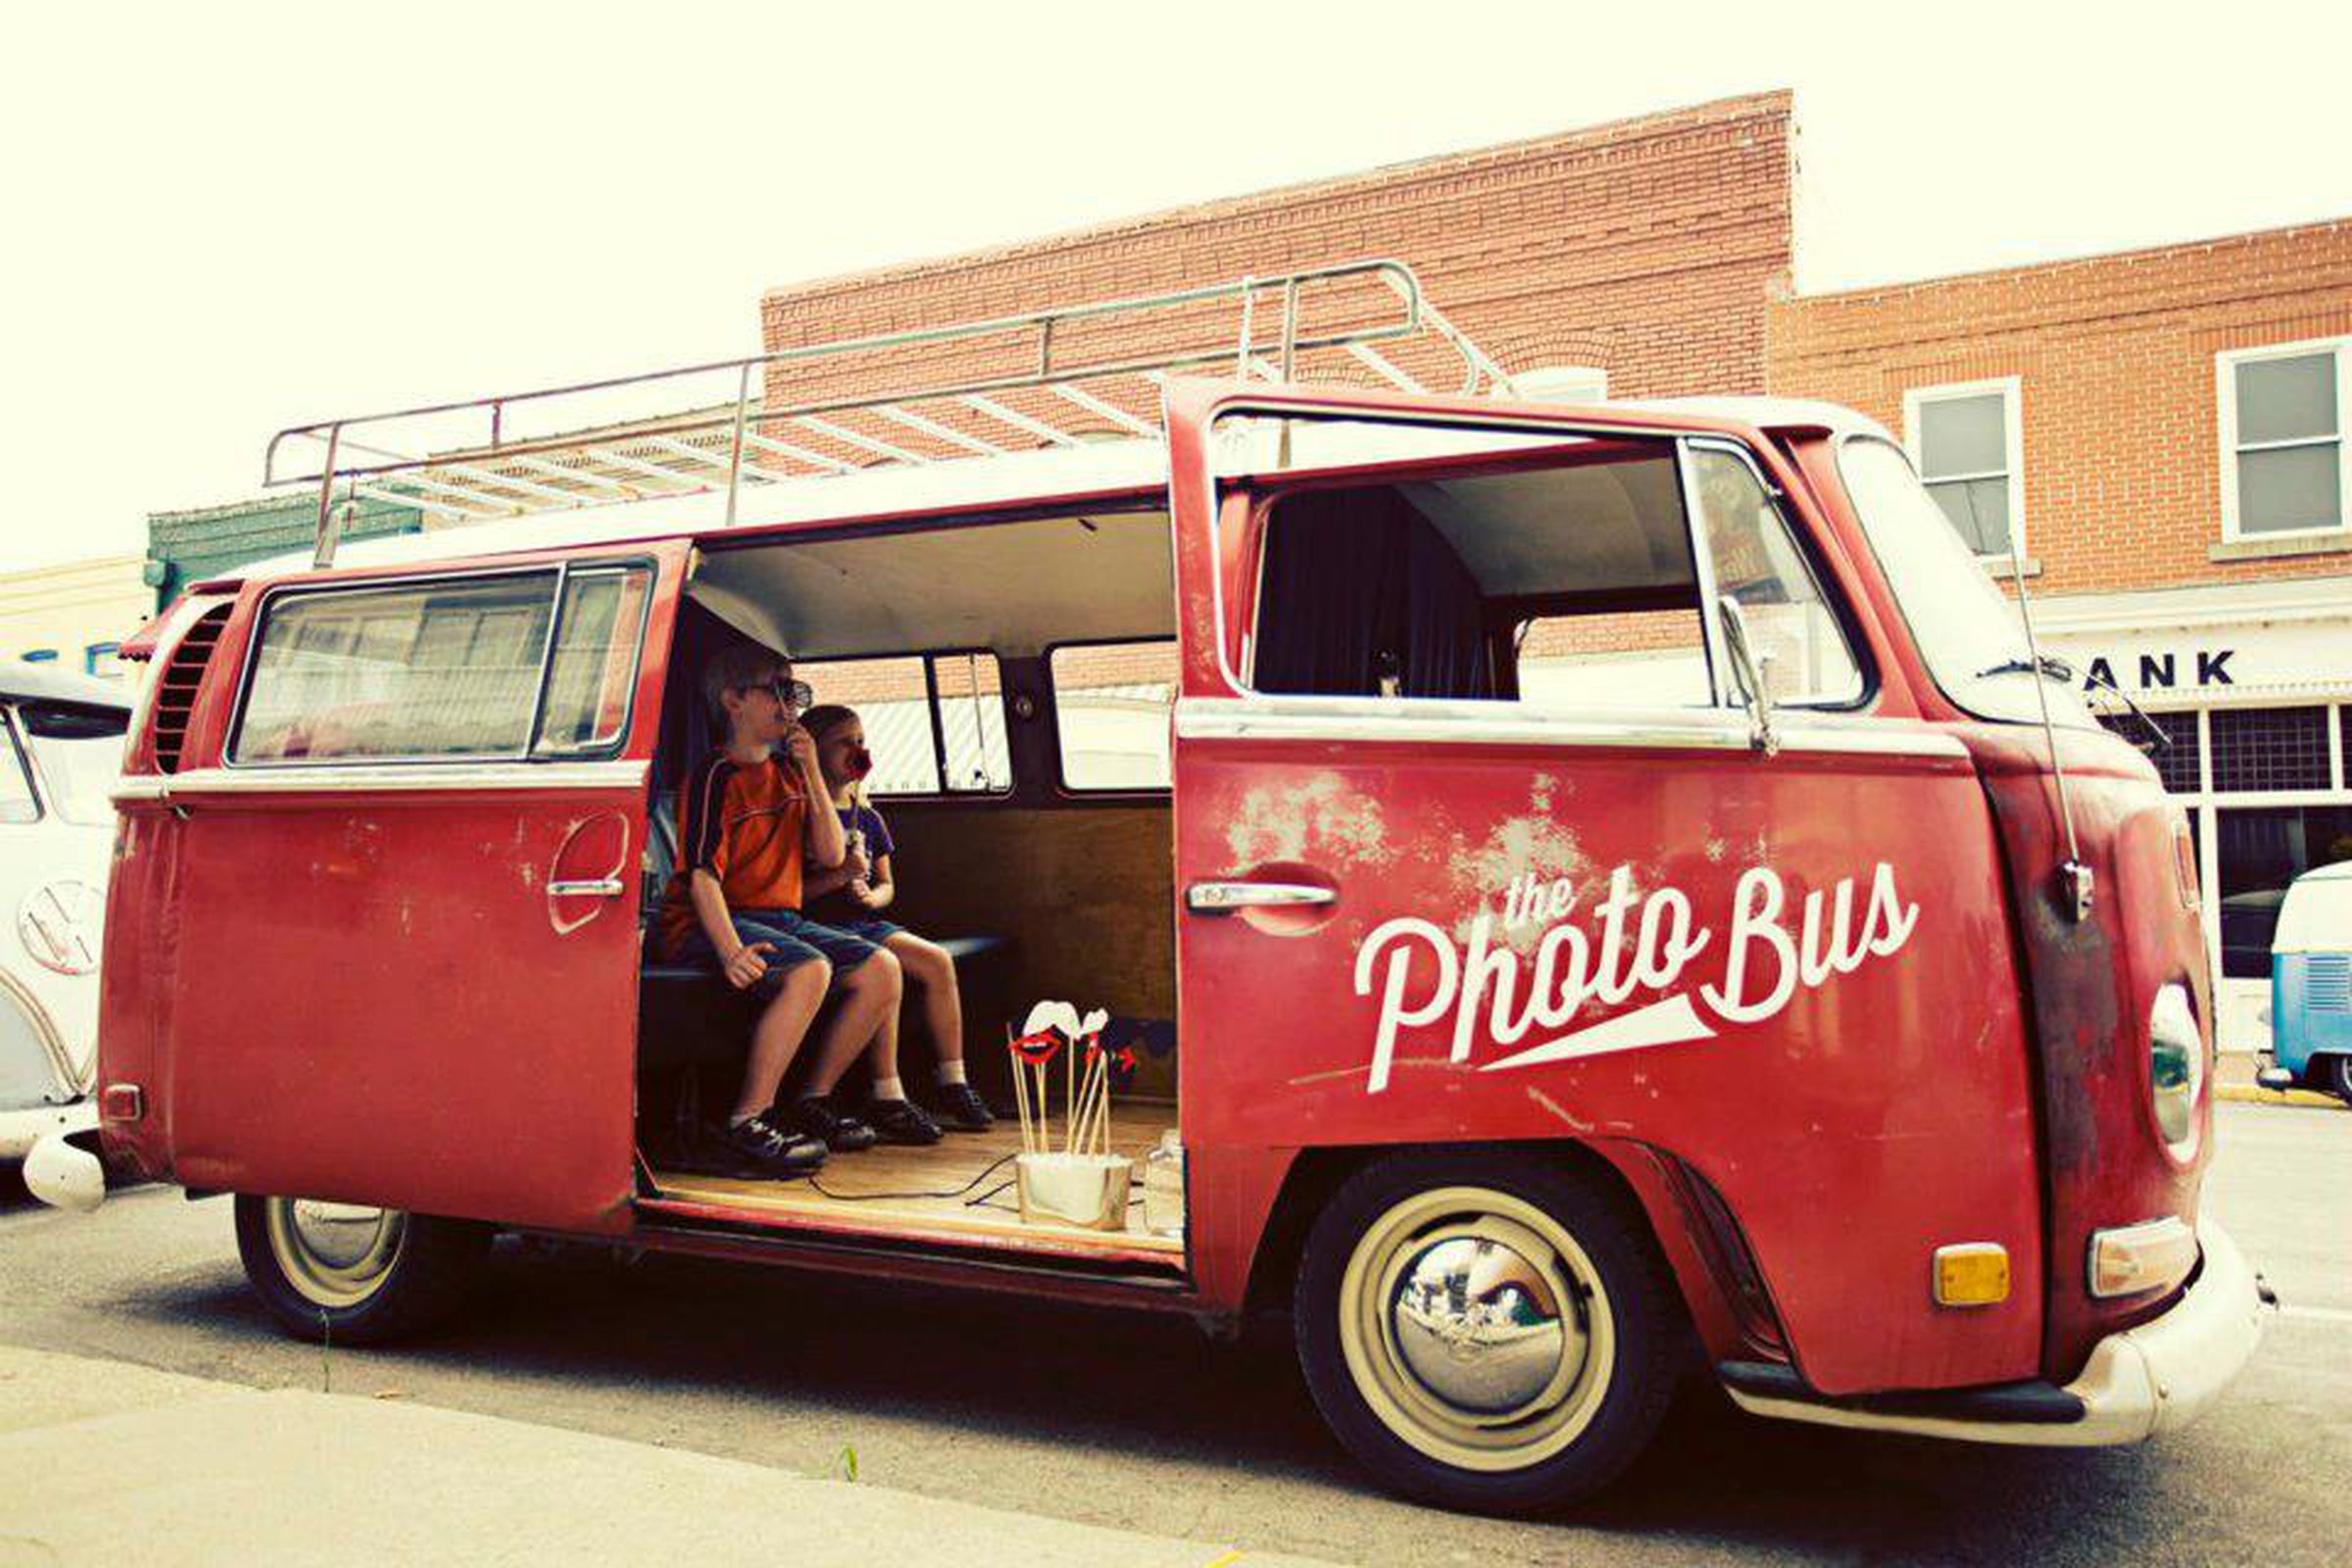 The Photo Bus